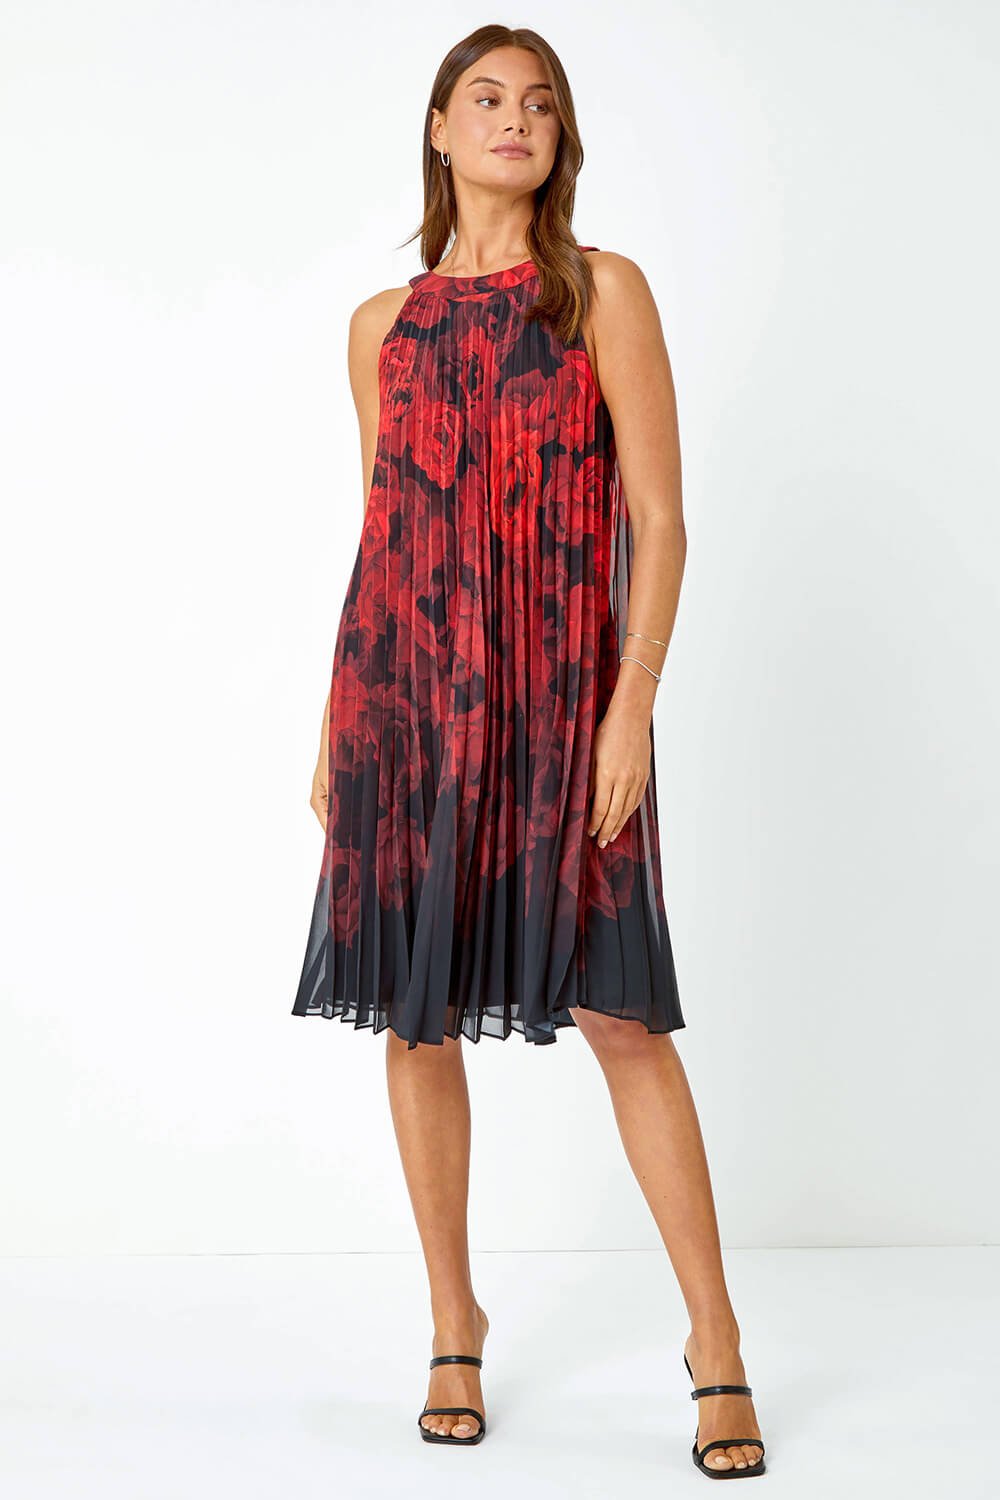 Black Sleeveless Floral Pleated Swing Dress , Image 2 of 5